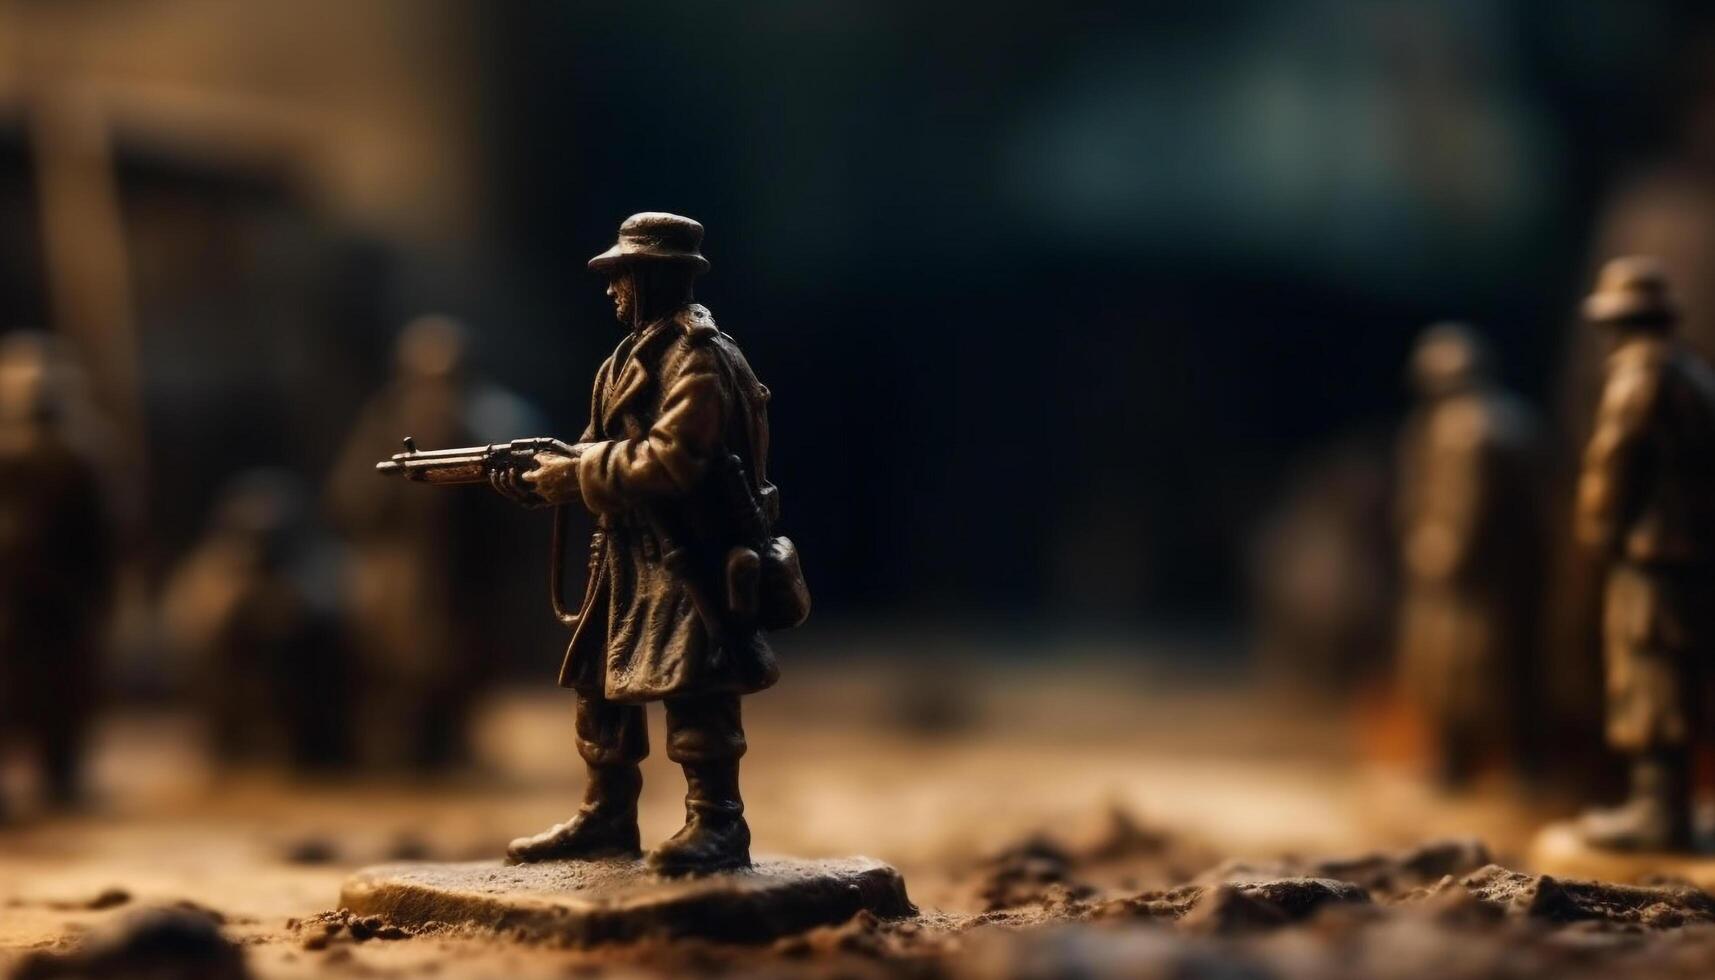 Plastic toy soldier aims rifle on battlefield generated by AI photo